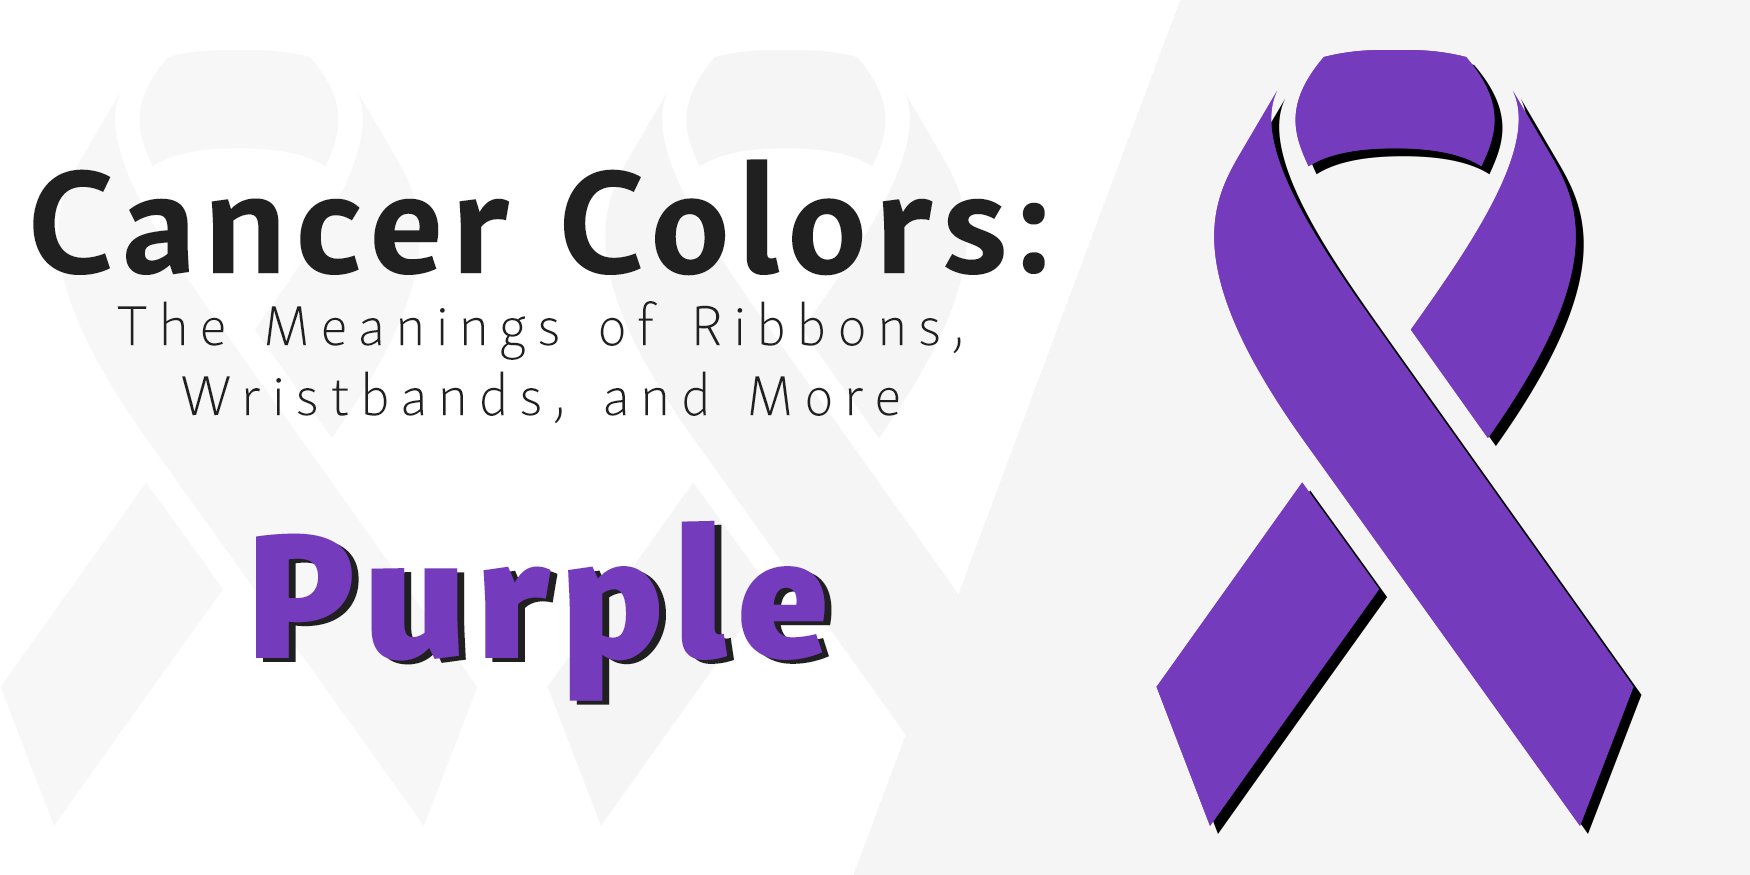 Graphic showing the purple cancer awareness ribbons for pancreatic cancer during November